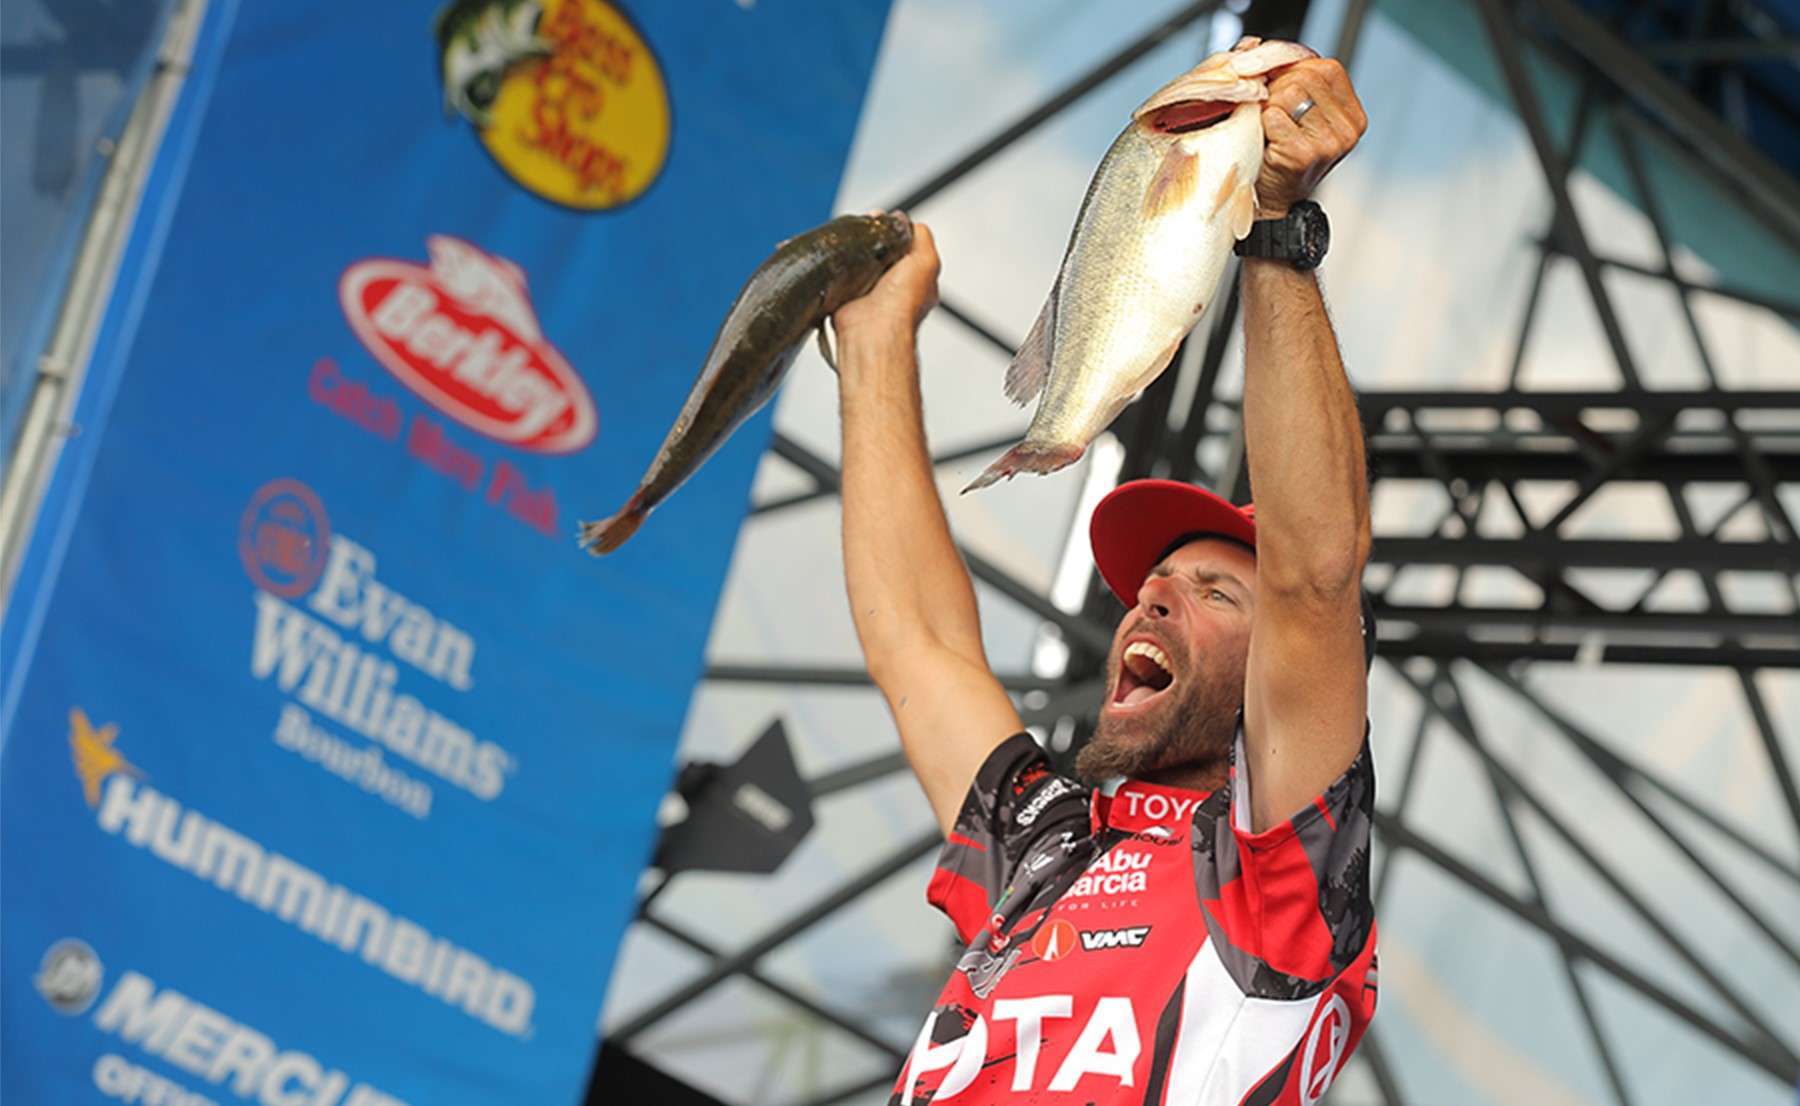 Throughout his fishing career, Mike Iaconelli has proven to be a fan favorite in B.A.S.S. competition. The 2003 Bassmaster Classic champion is known for his excitable nature, emotional outbursts, entertaining interviews and undying love for bass fishing. In this gallery, Ike shares a few of his favorite things outside the sphere of bass fishing.